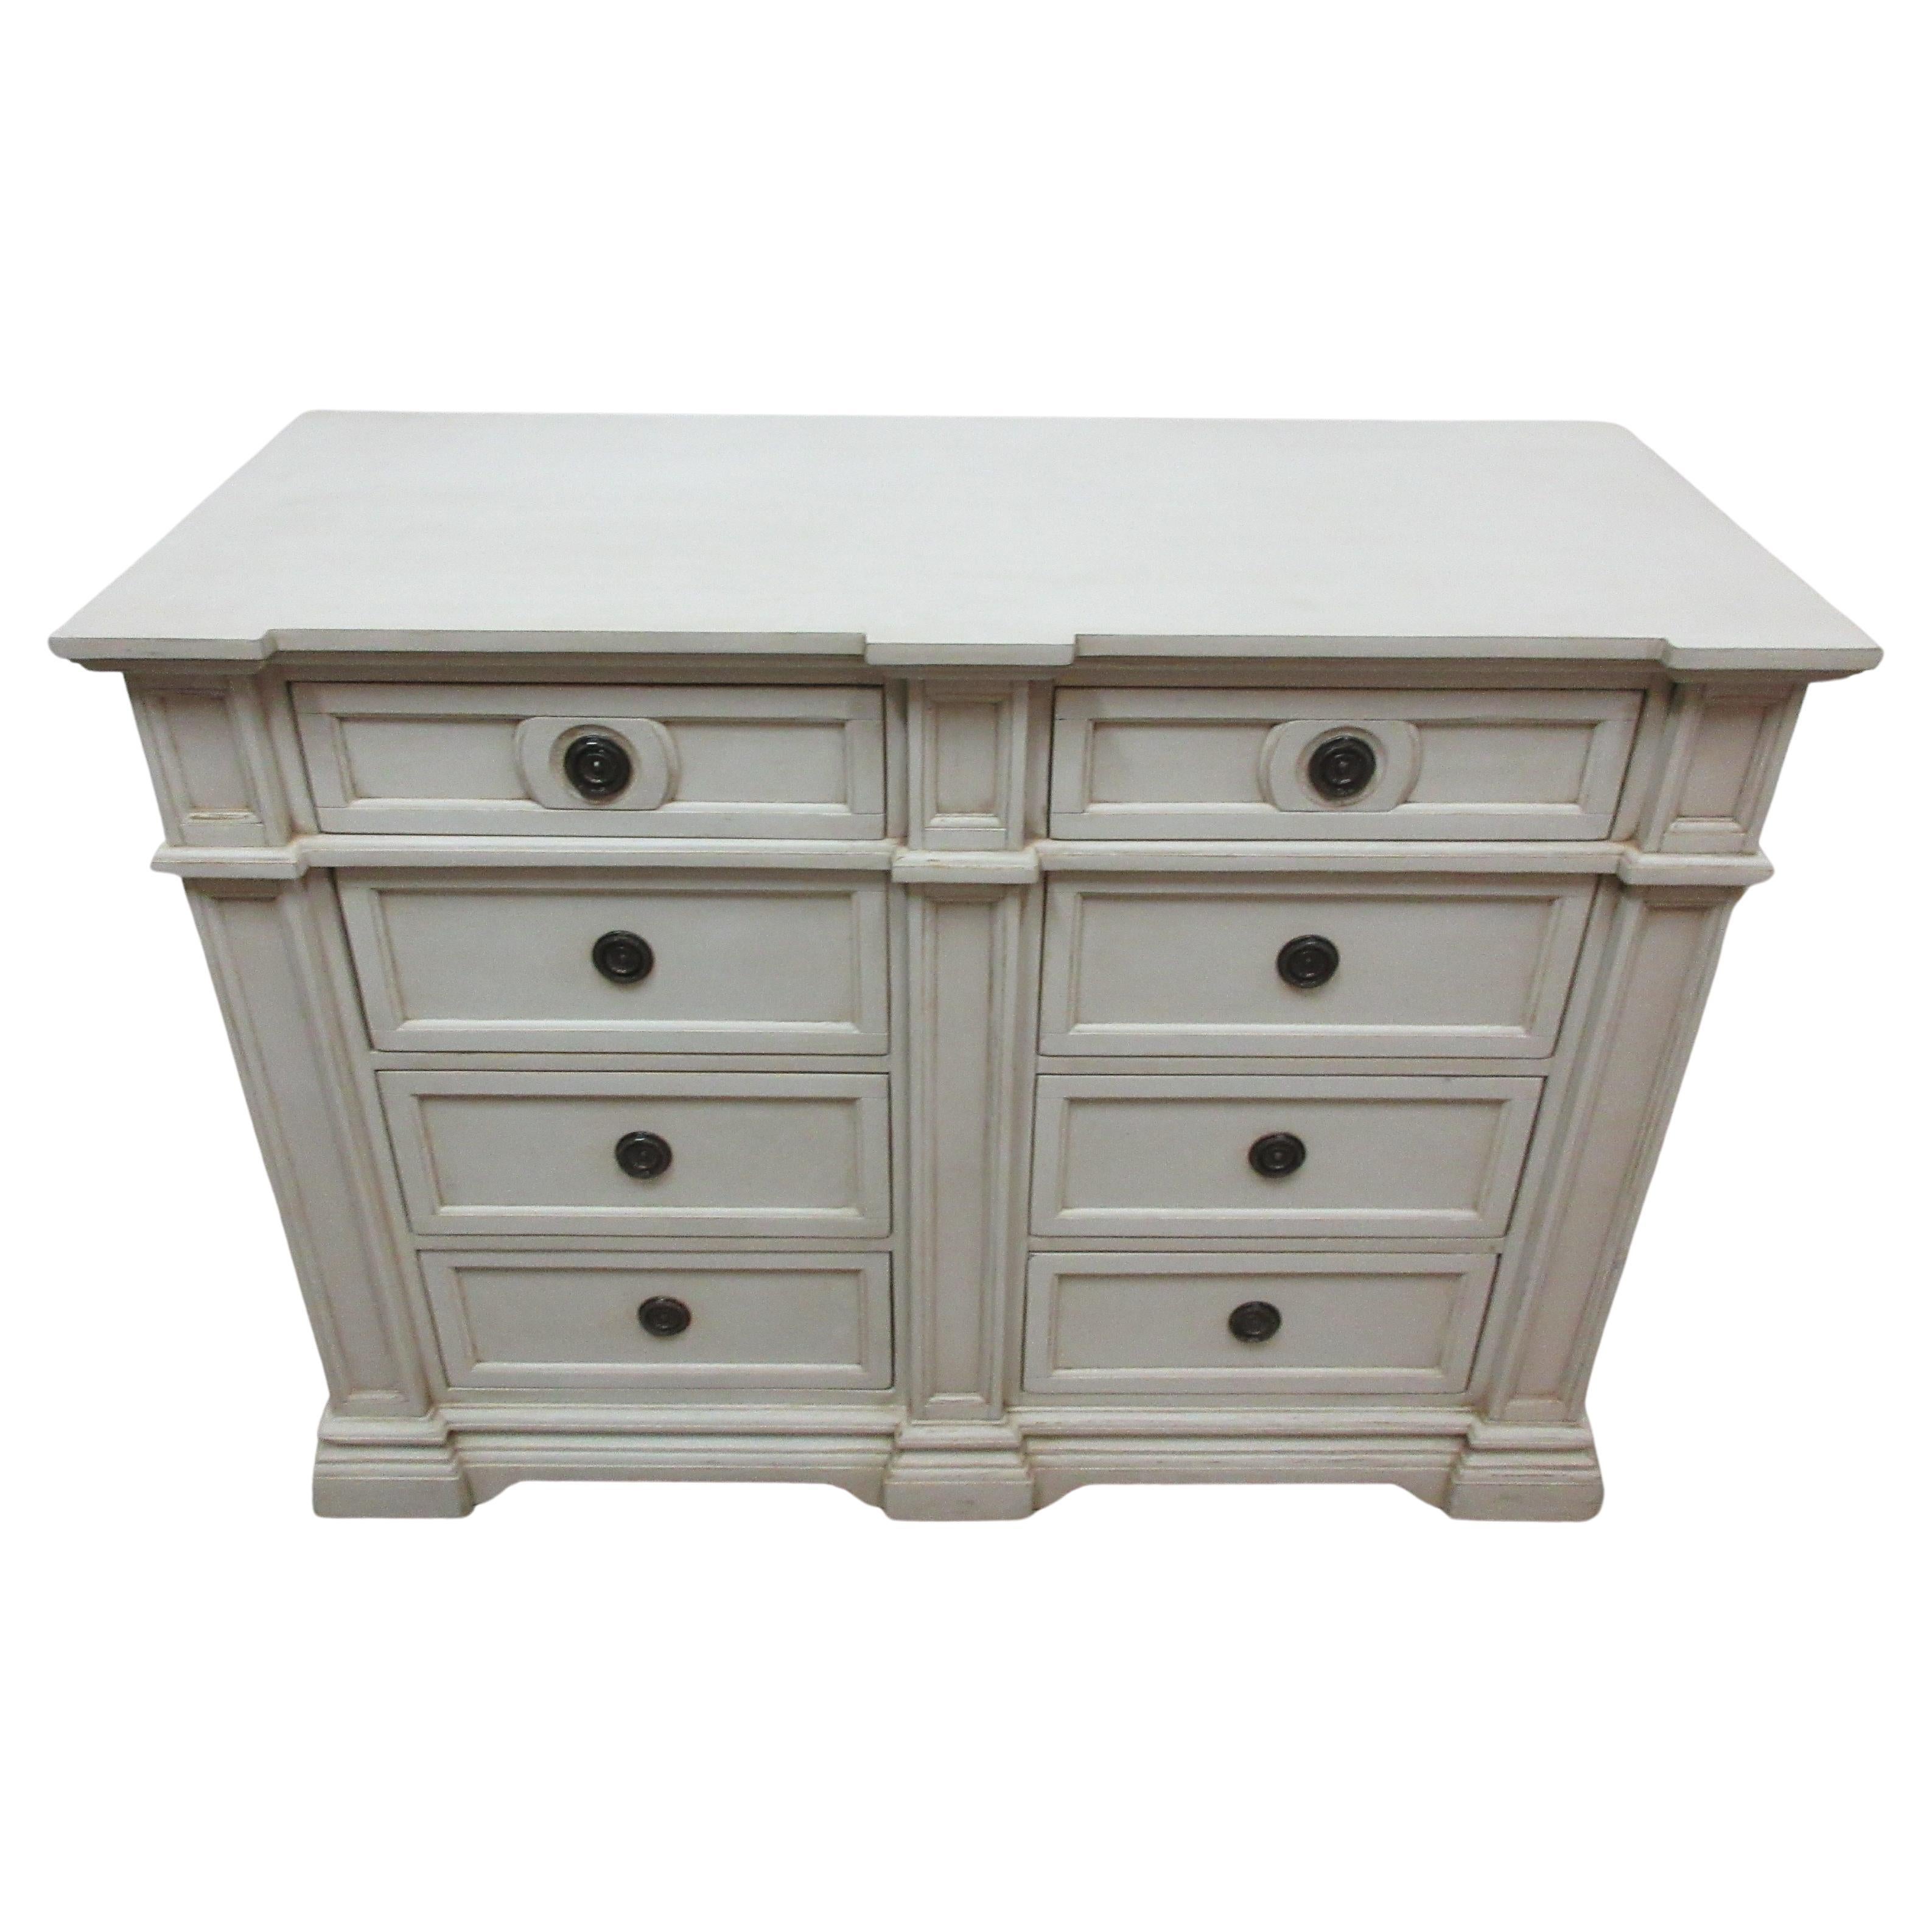 This is a unique Gustavian Style 8 drawer Chest. its been restored and repainted with Milk Paints 